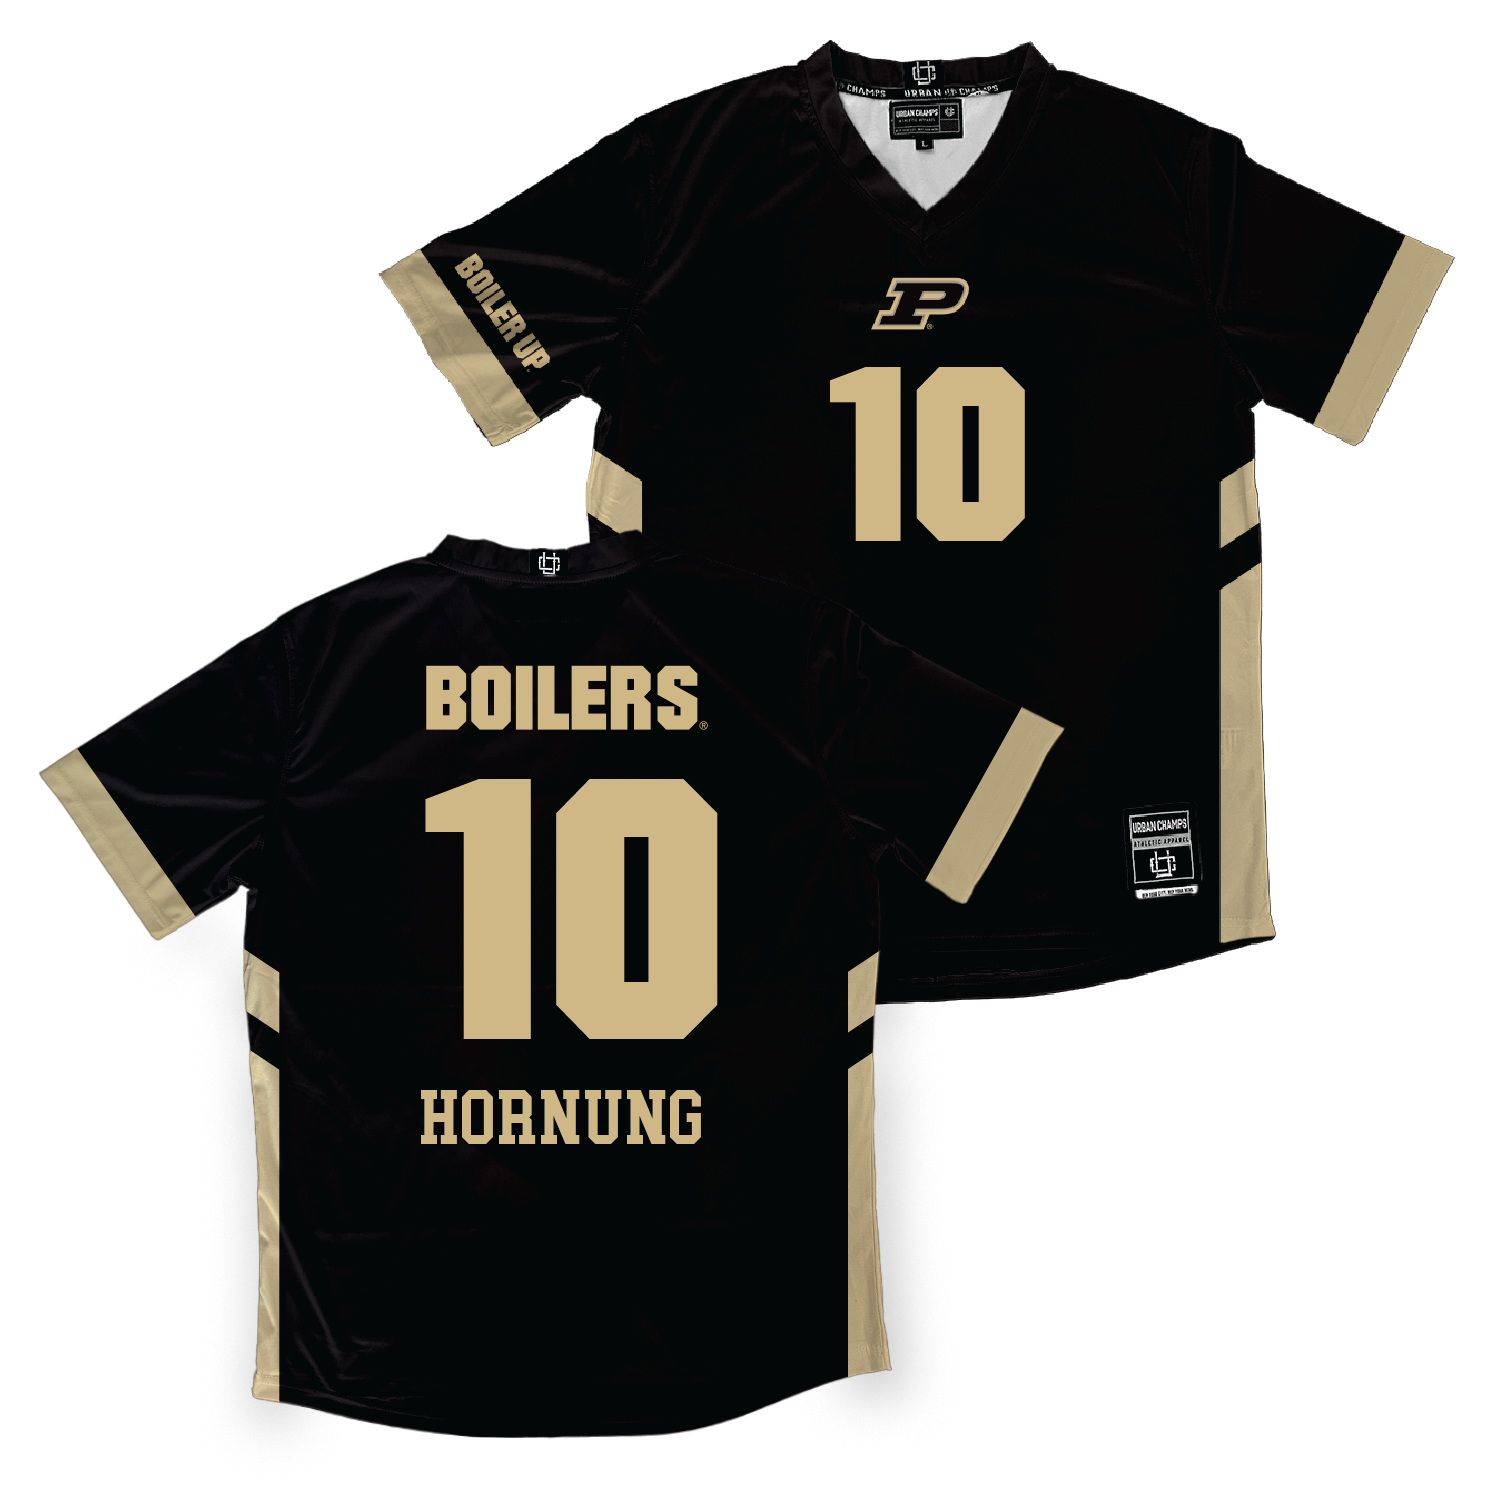 Black Purdue Women's Volleyball Jersey - Ali Hornung | #10 Youth Small